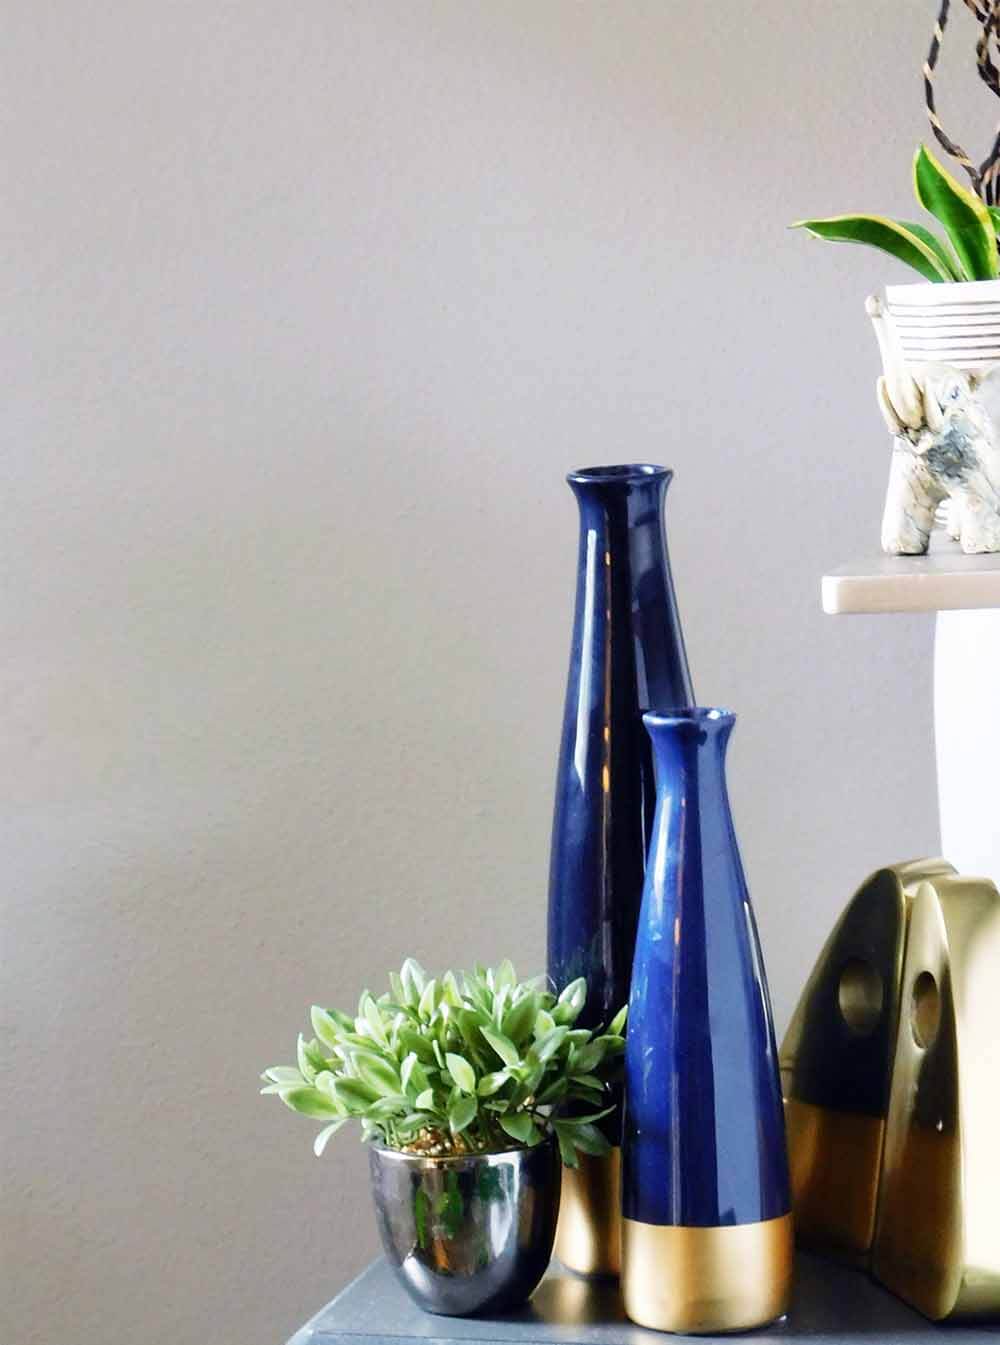 Finish your DIY projects instead of letting the little things go undone.